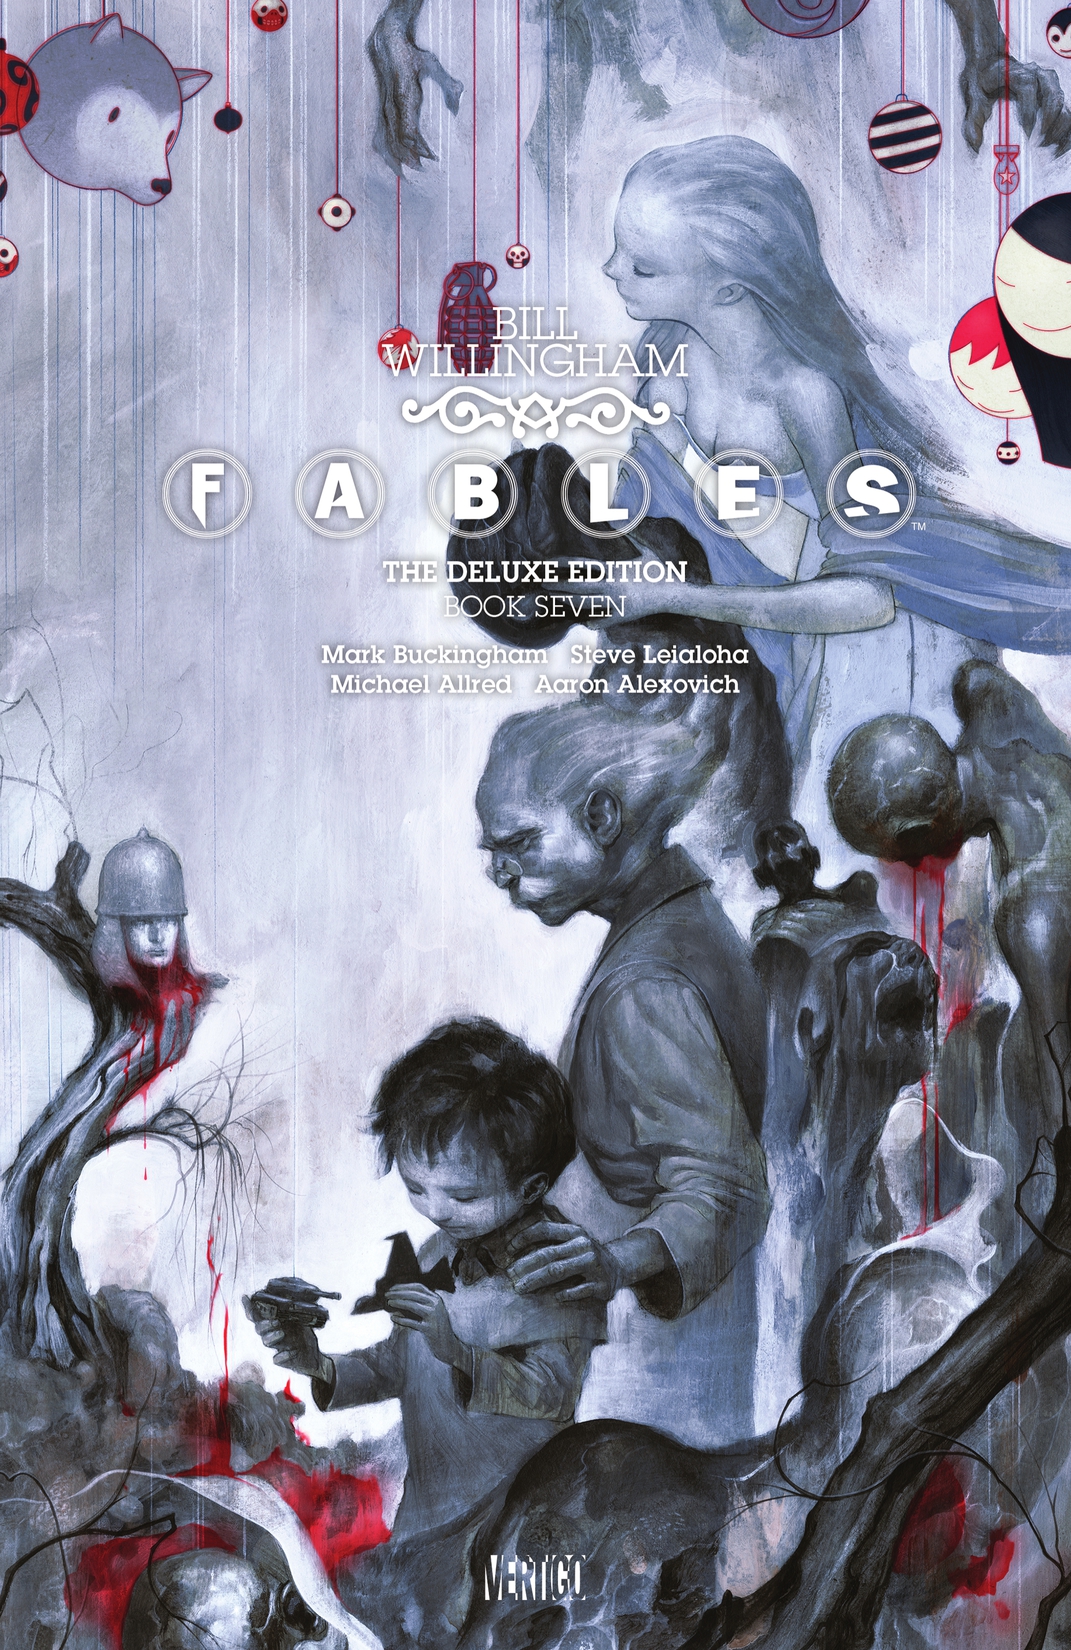 Fables: The Deluxe Edition Book Seven preview images